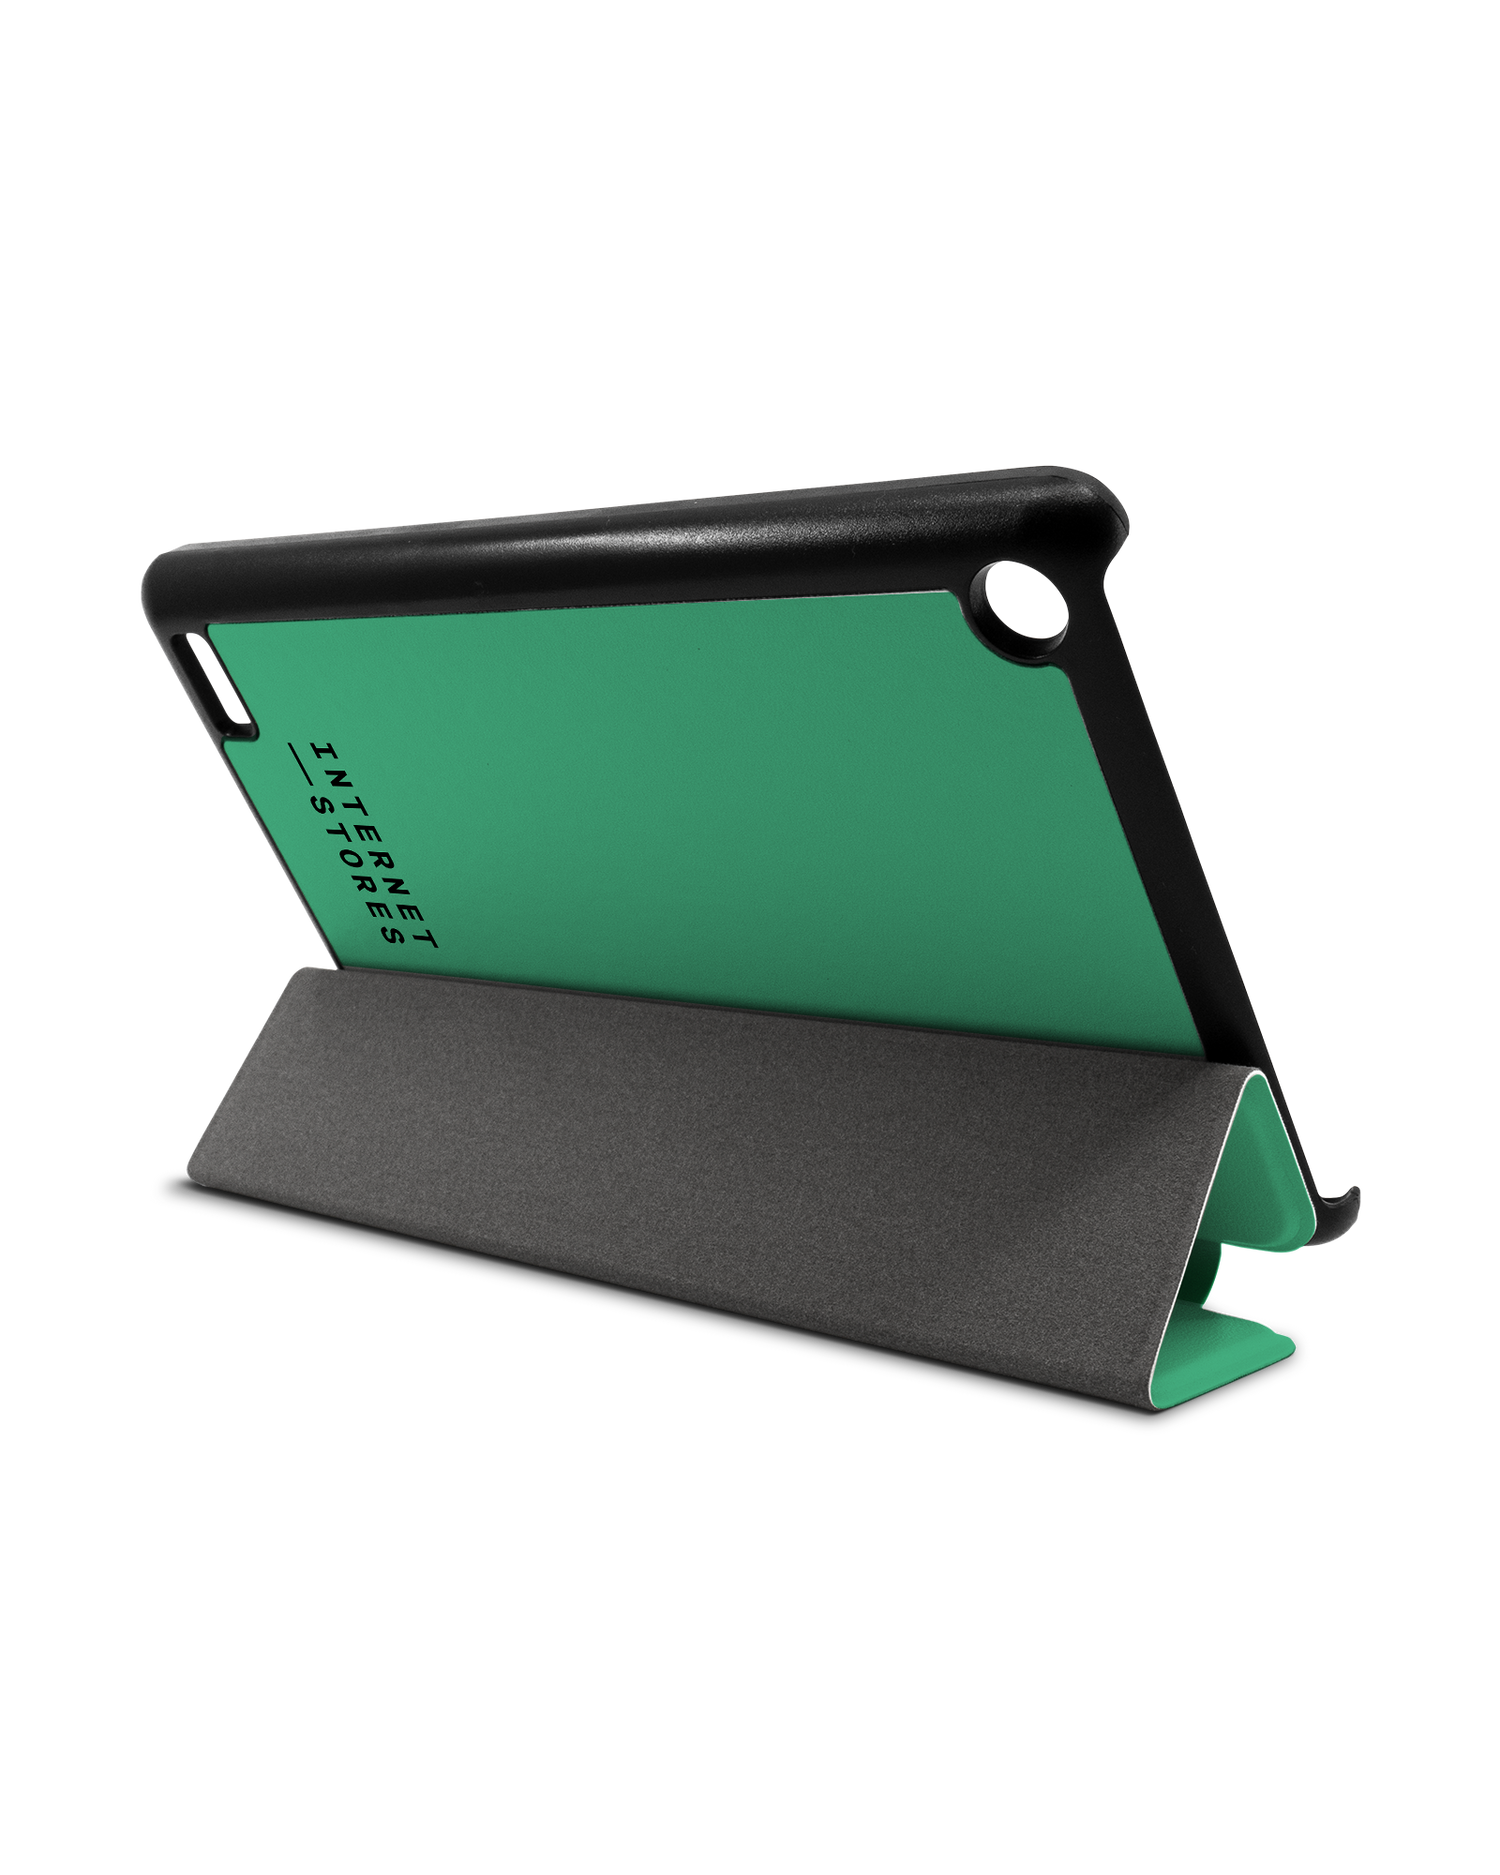 ISG Neon Green Tablet Smart Case for Amazon Fire 7: Used as Stand